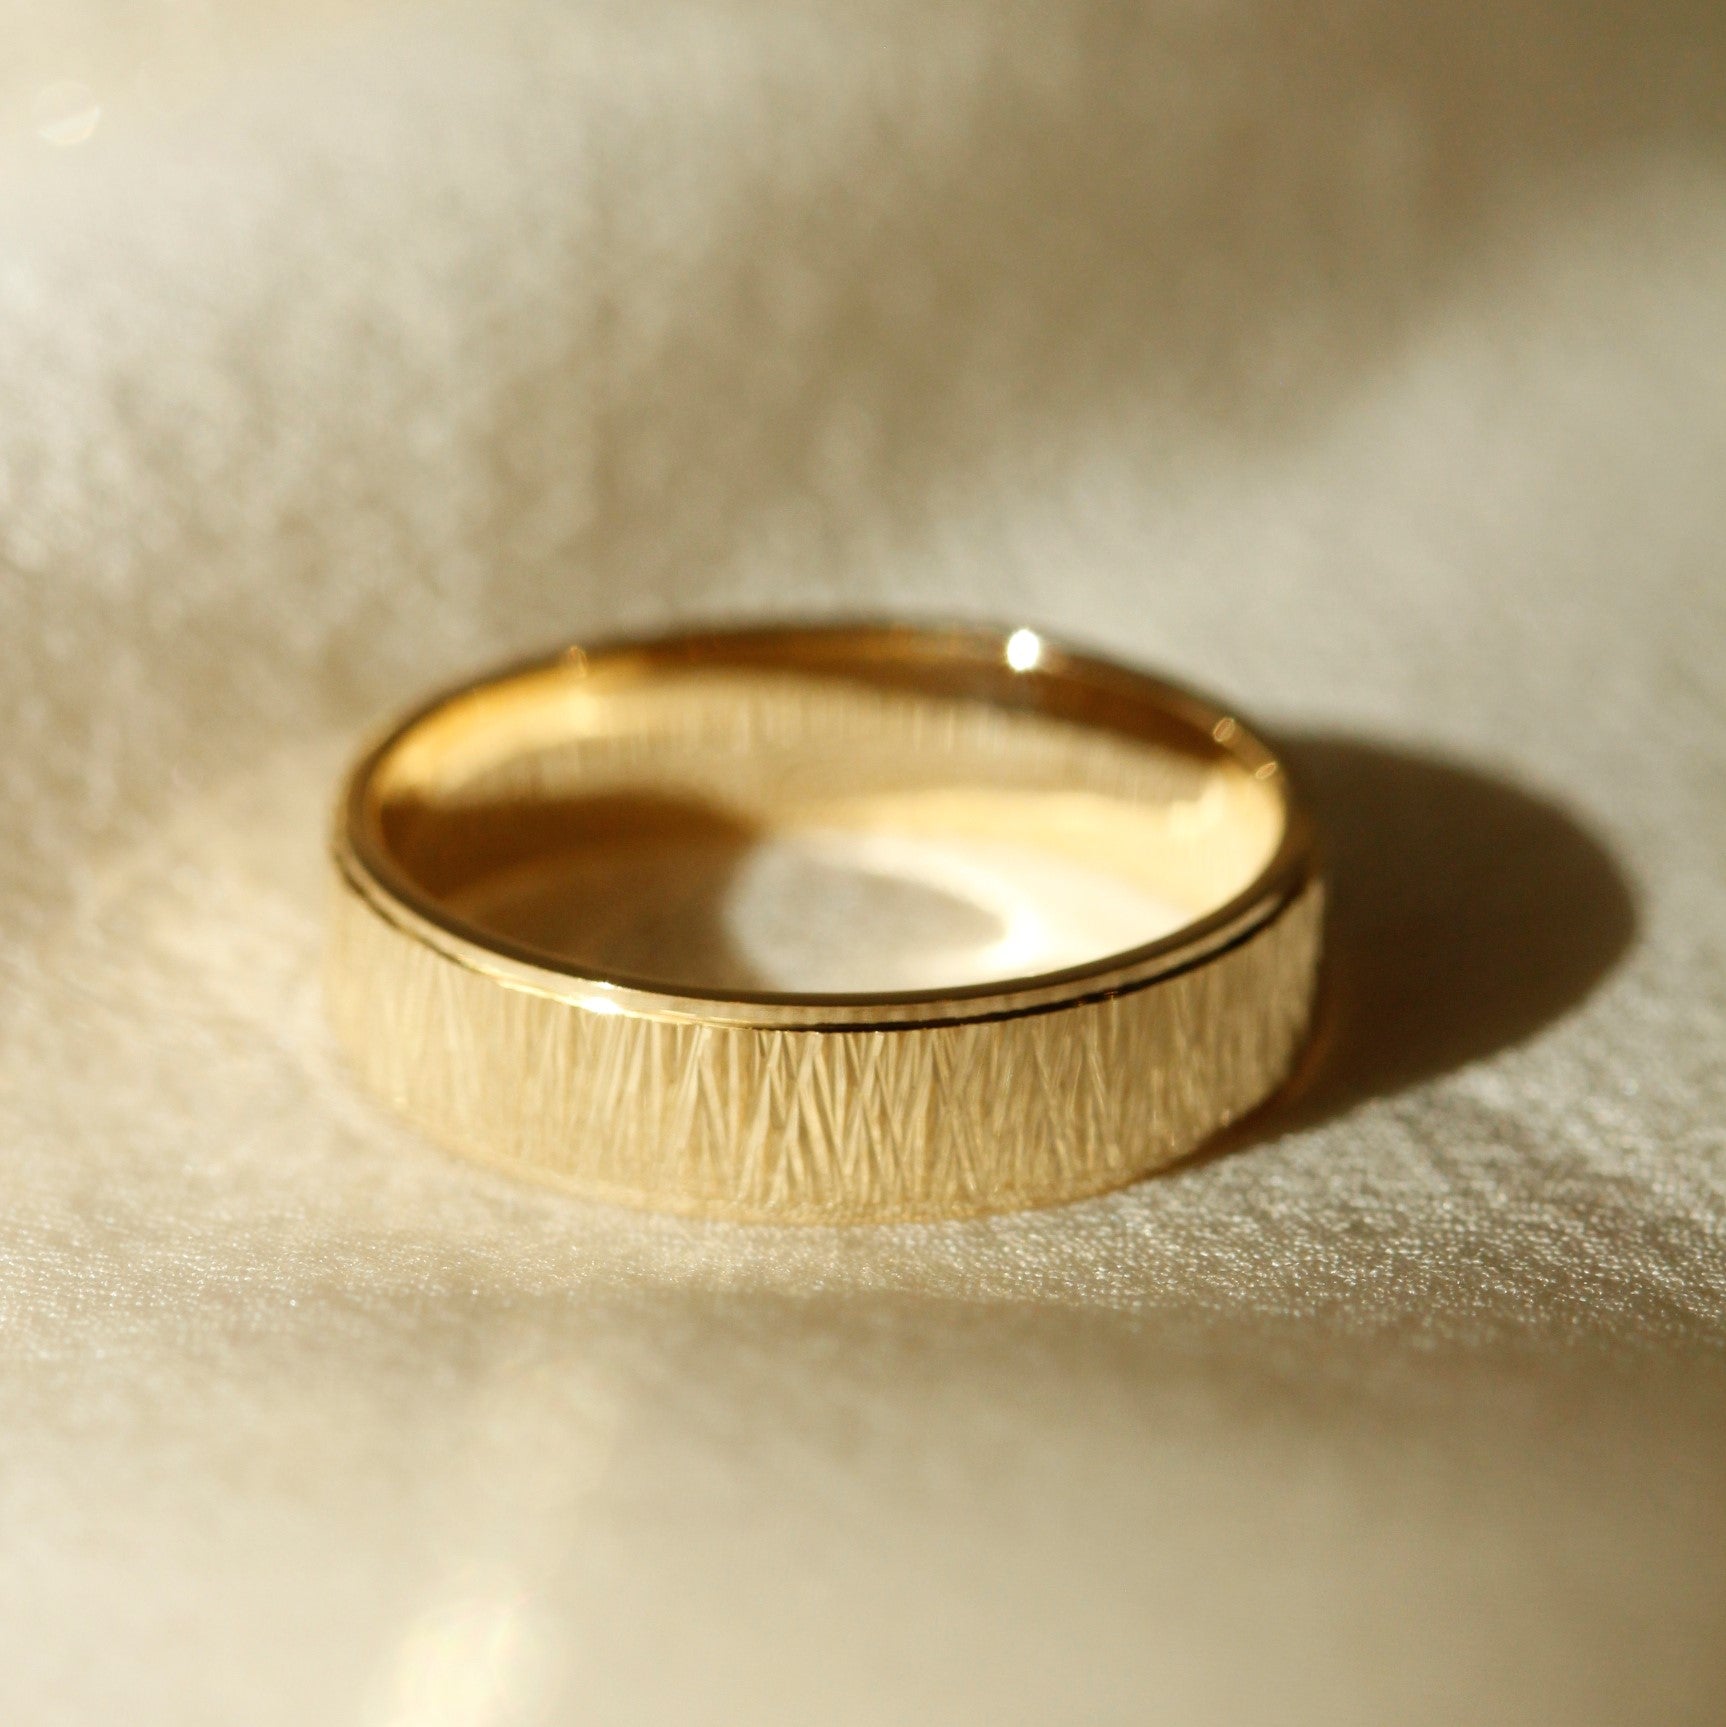 Men's Wedding ring in 18k Yellow gold with surface etching or engraving